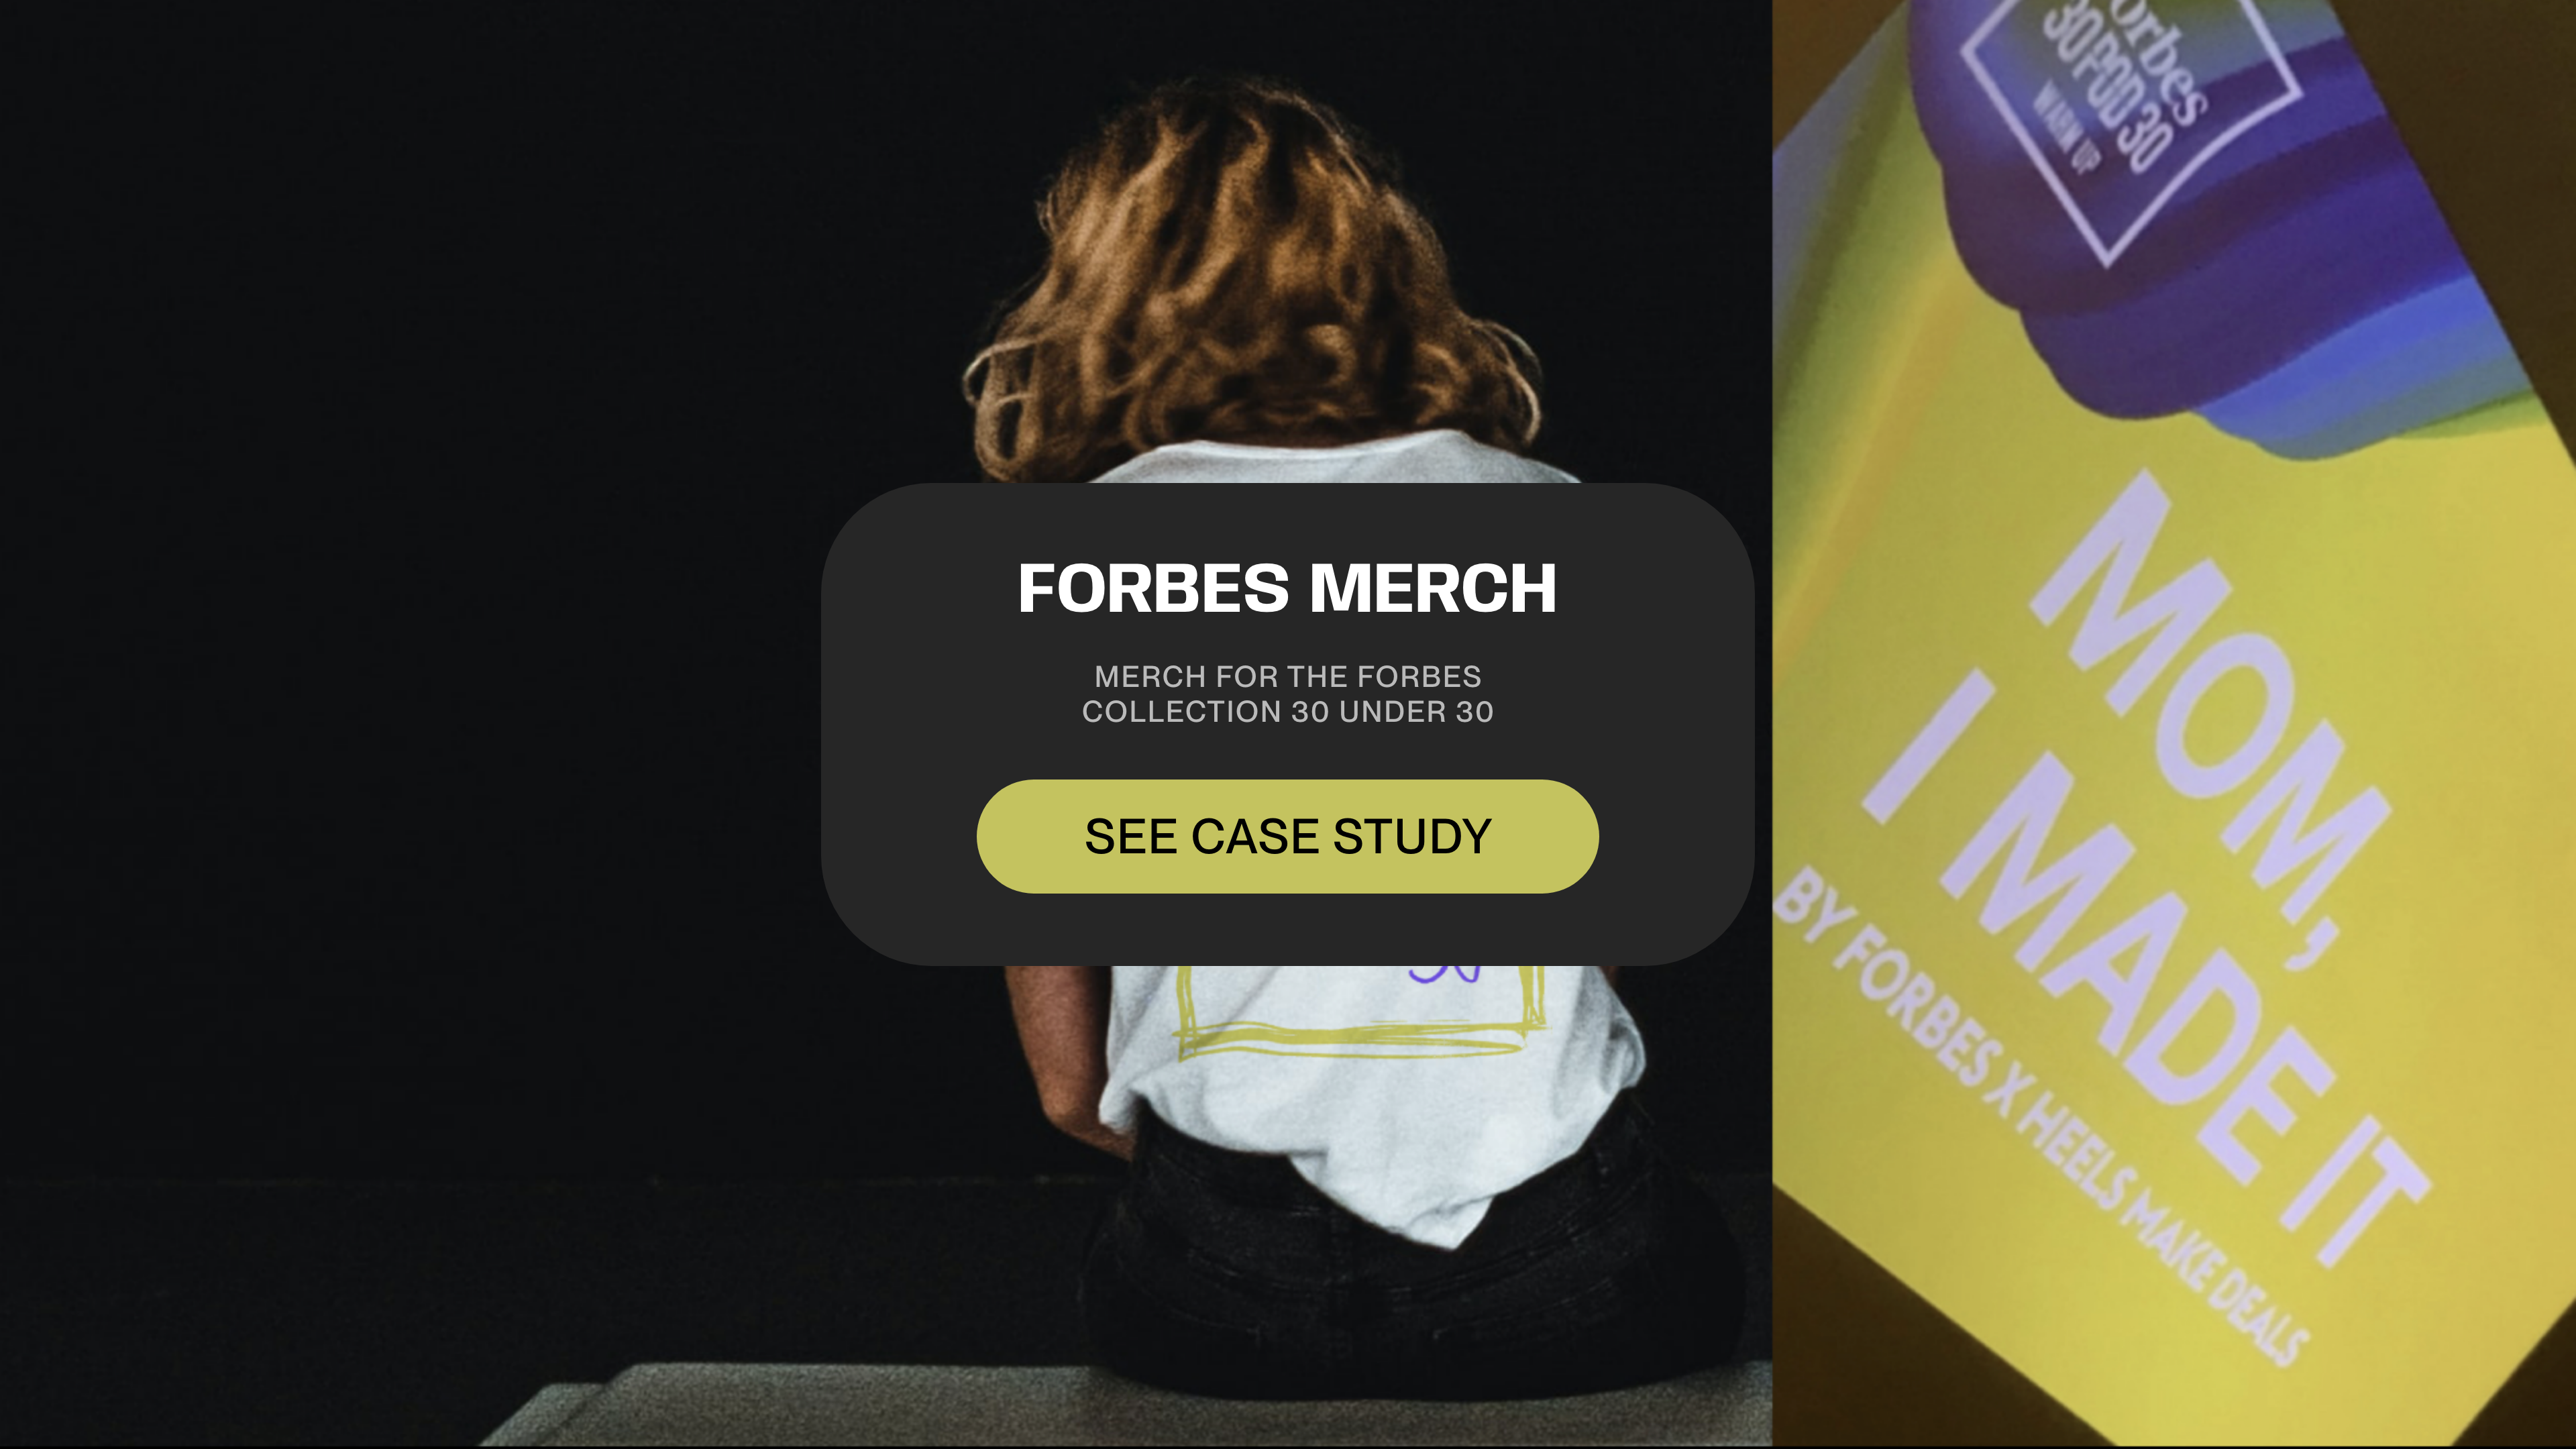 forbes_merch_mobile_banner